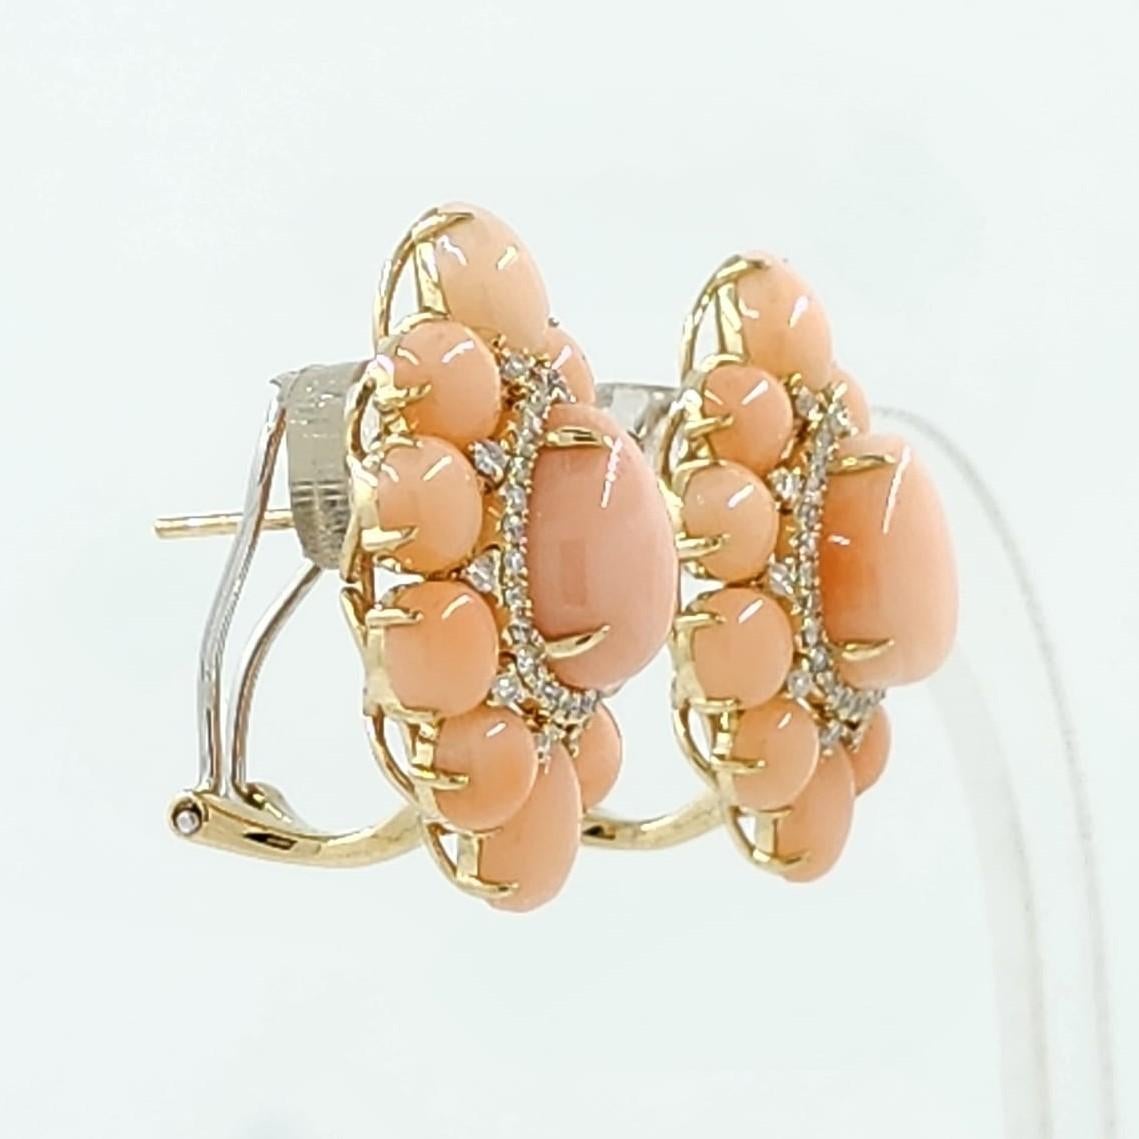 Contemporary Vintage Coral Diamond Earrings in 14 Karat Yellow Gold